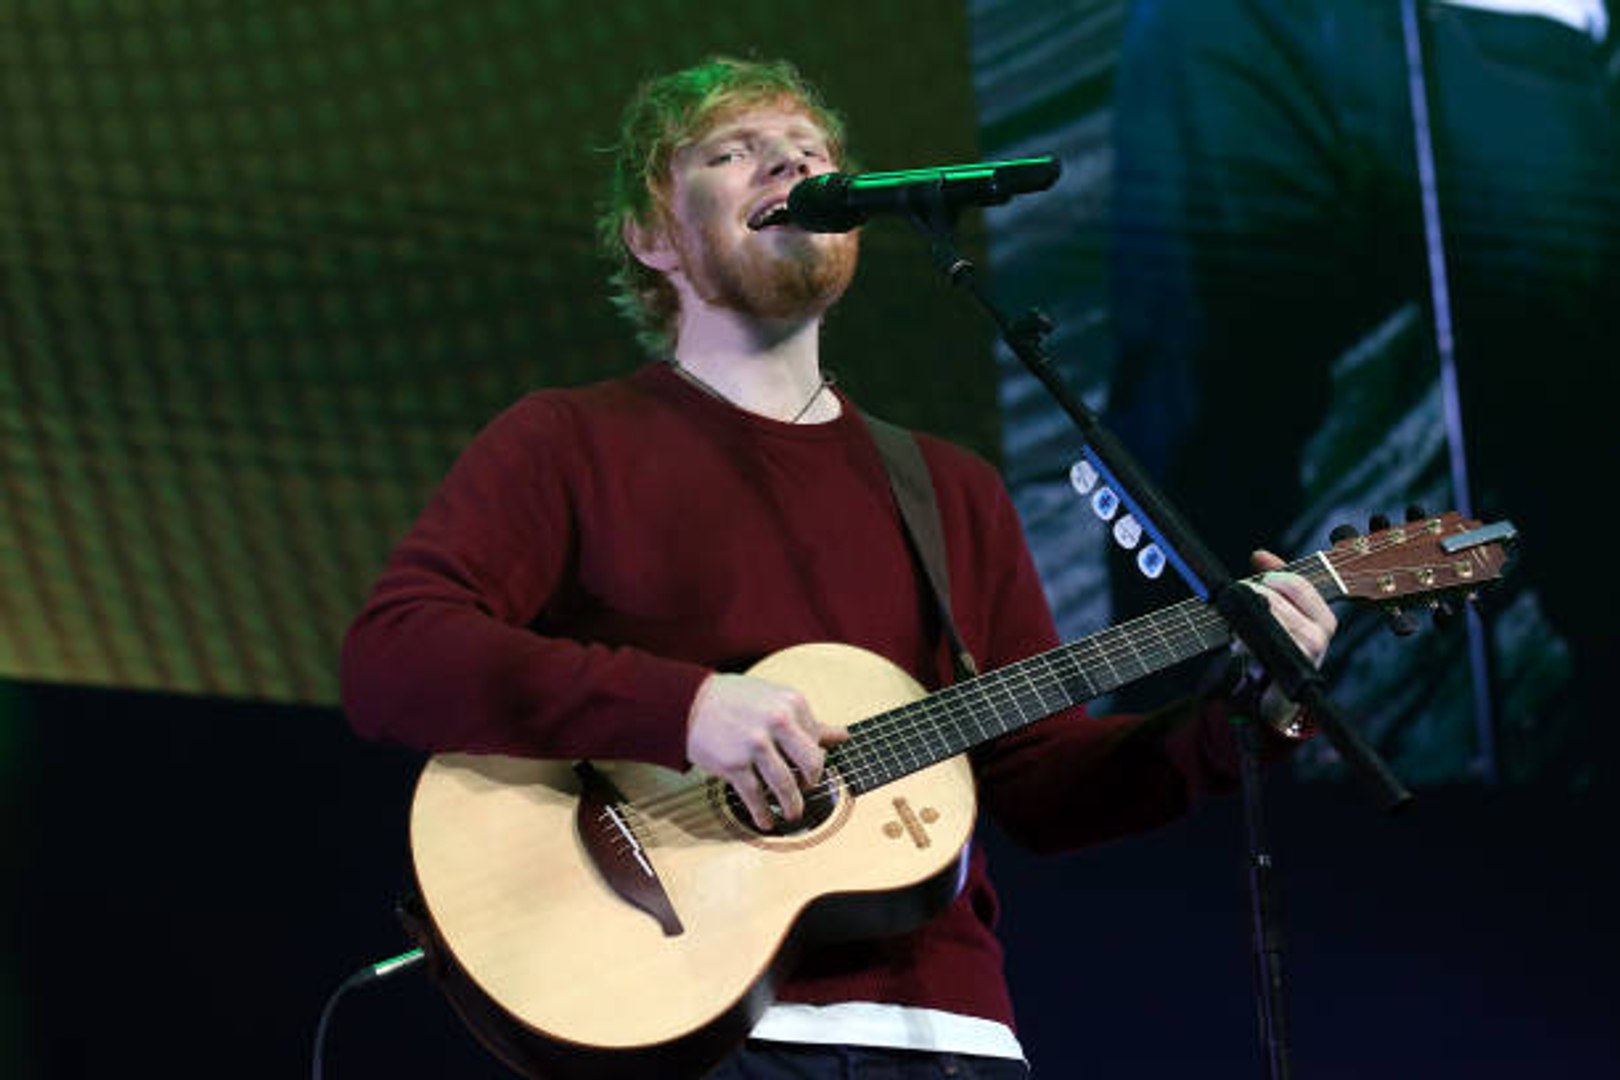 Ed Sheeran Paid Himself £73.4 Million in 2019 From 'Divide' Tour Earnings